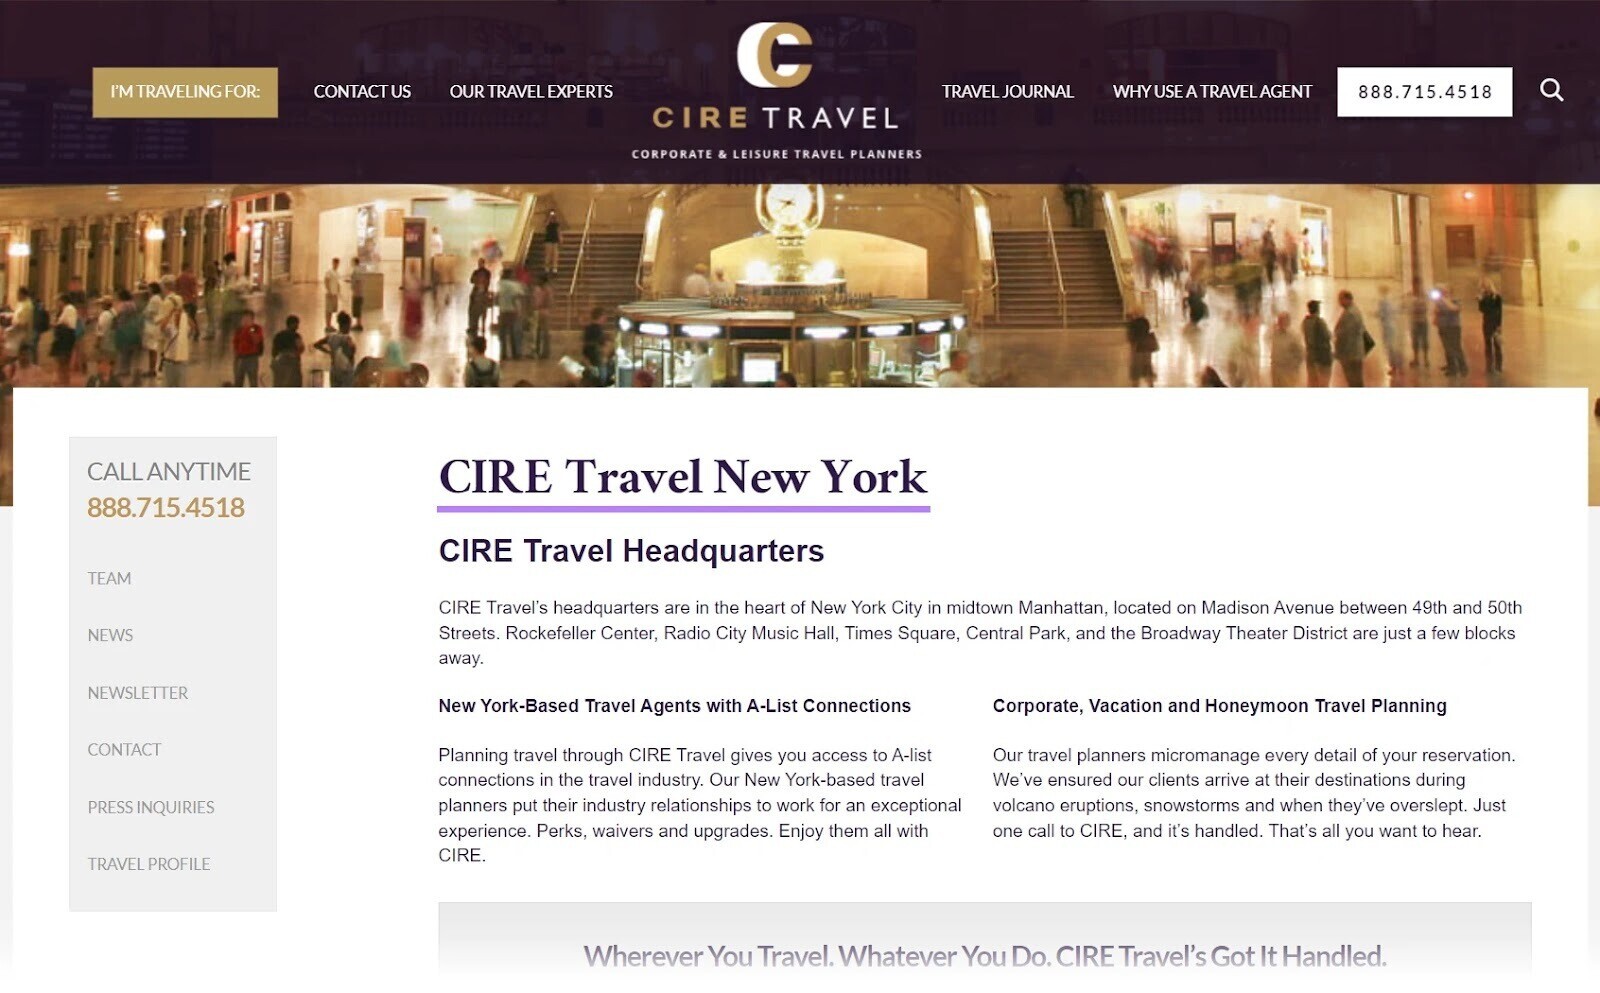 "CIRE Travel New York" page